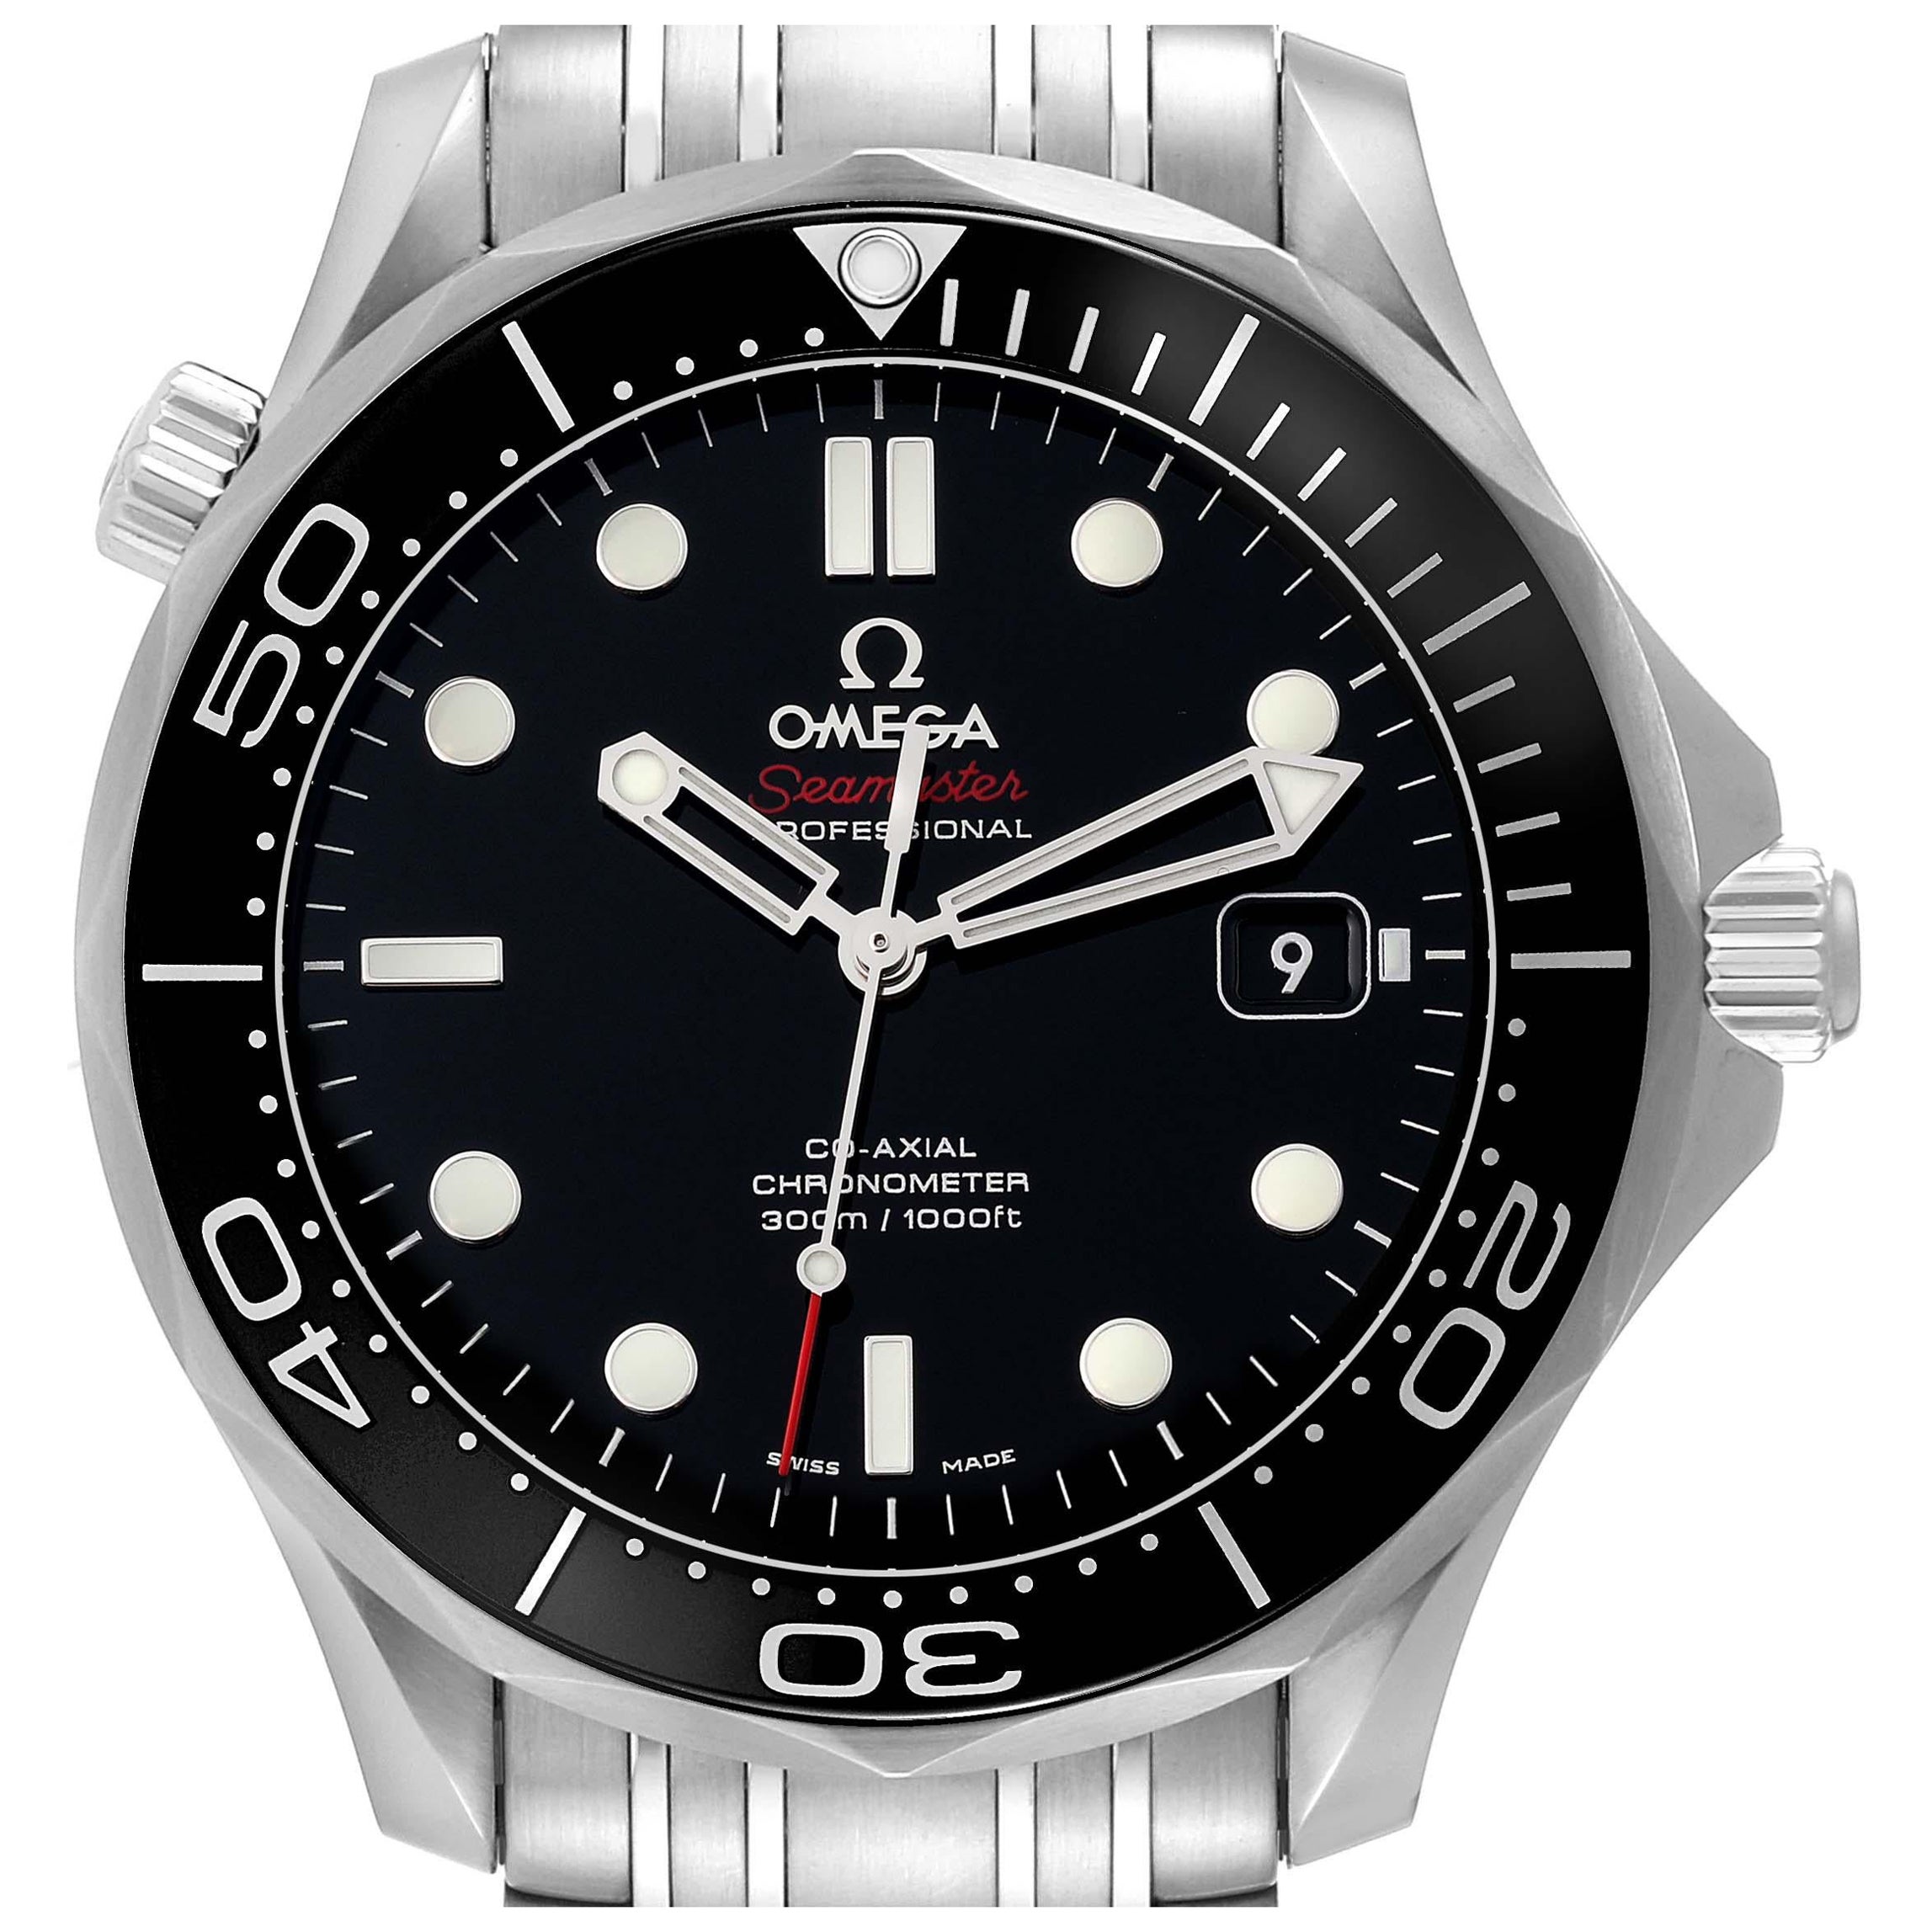 Omega Seamaster Diver 300M Steel Mens Watch 212.30.41.20.01.003 Box Card